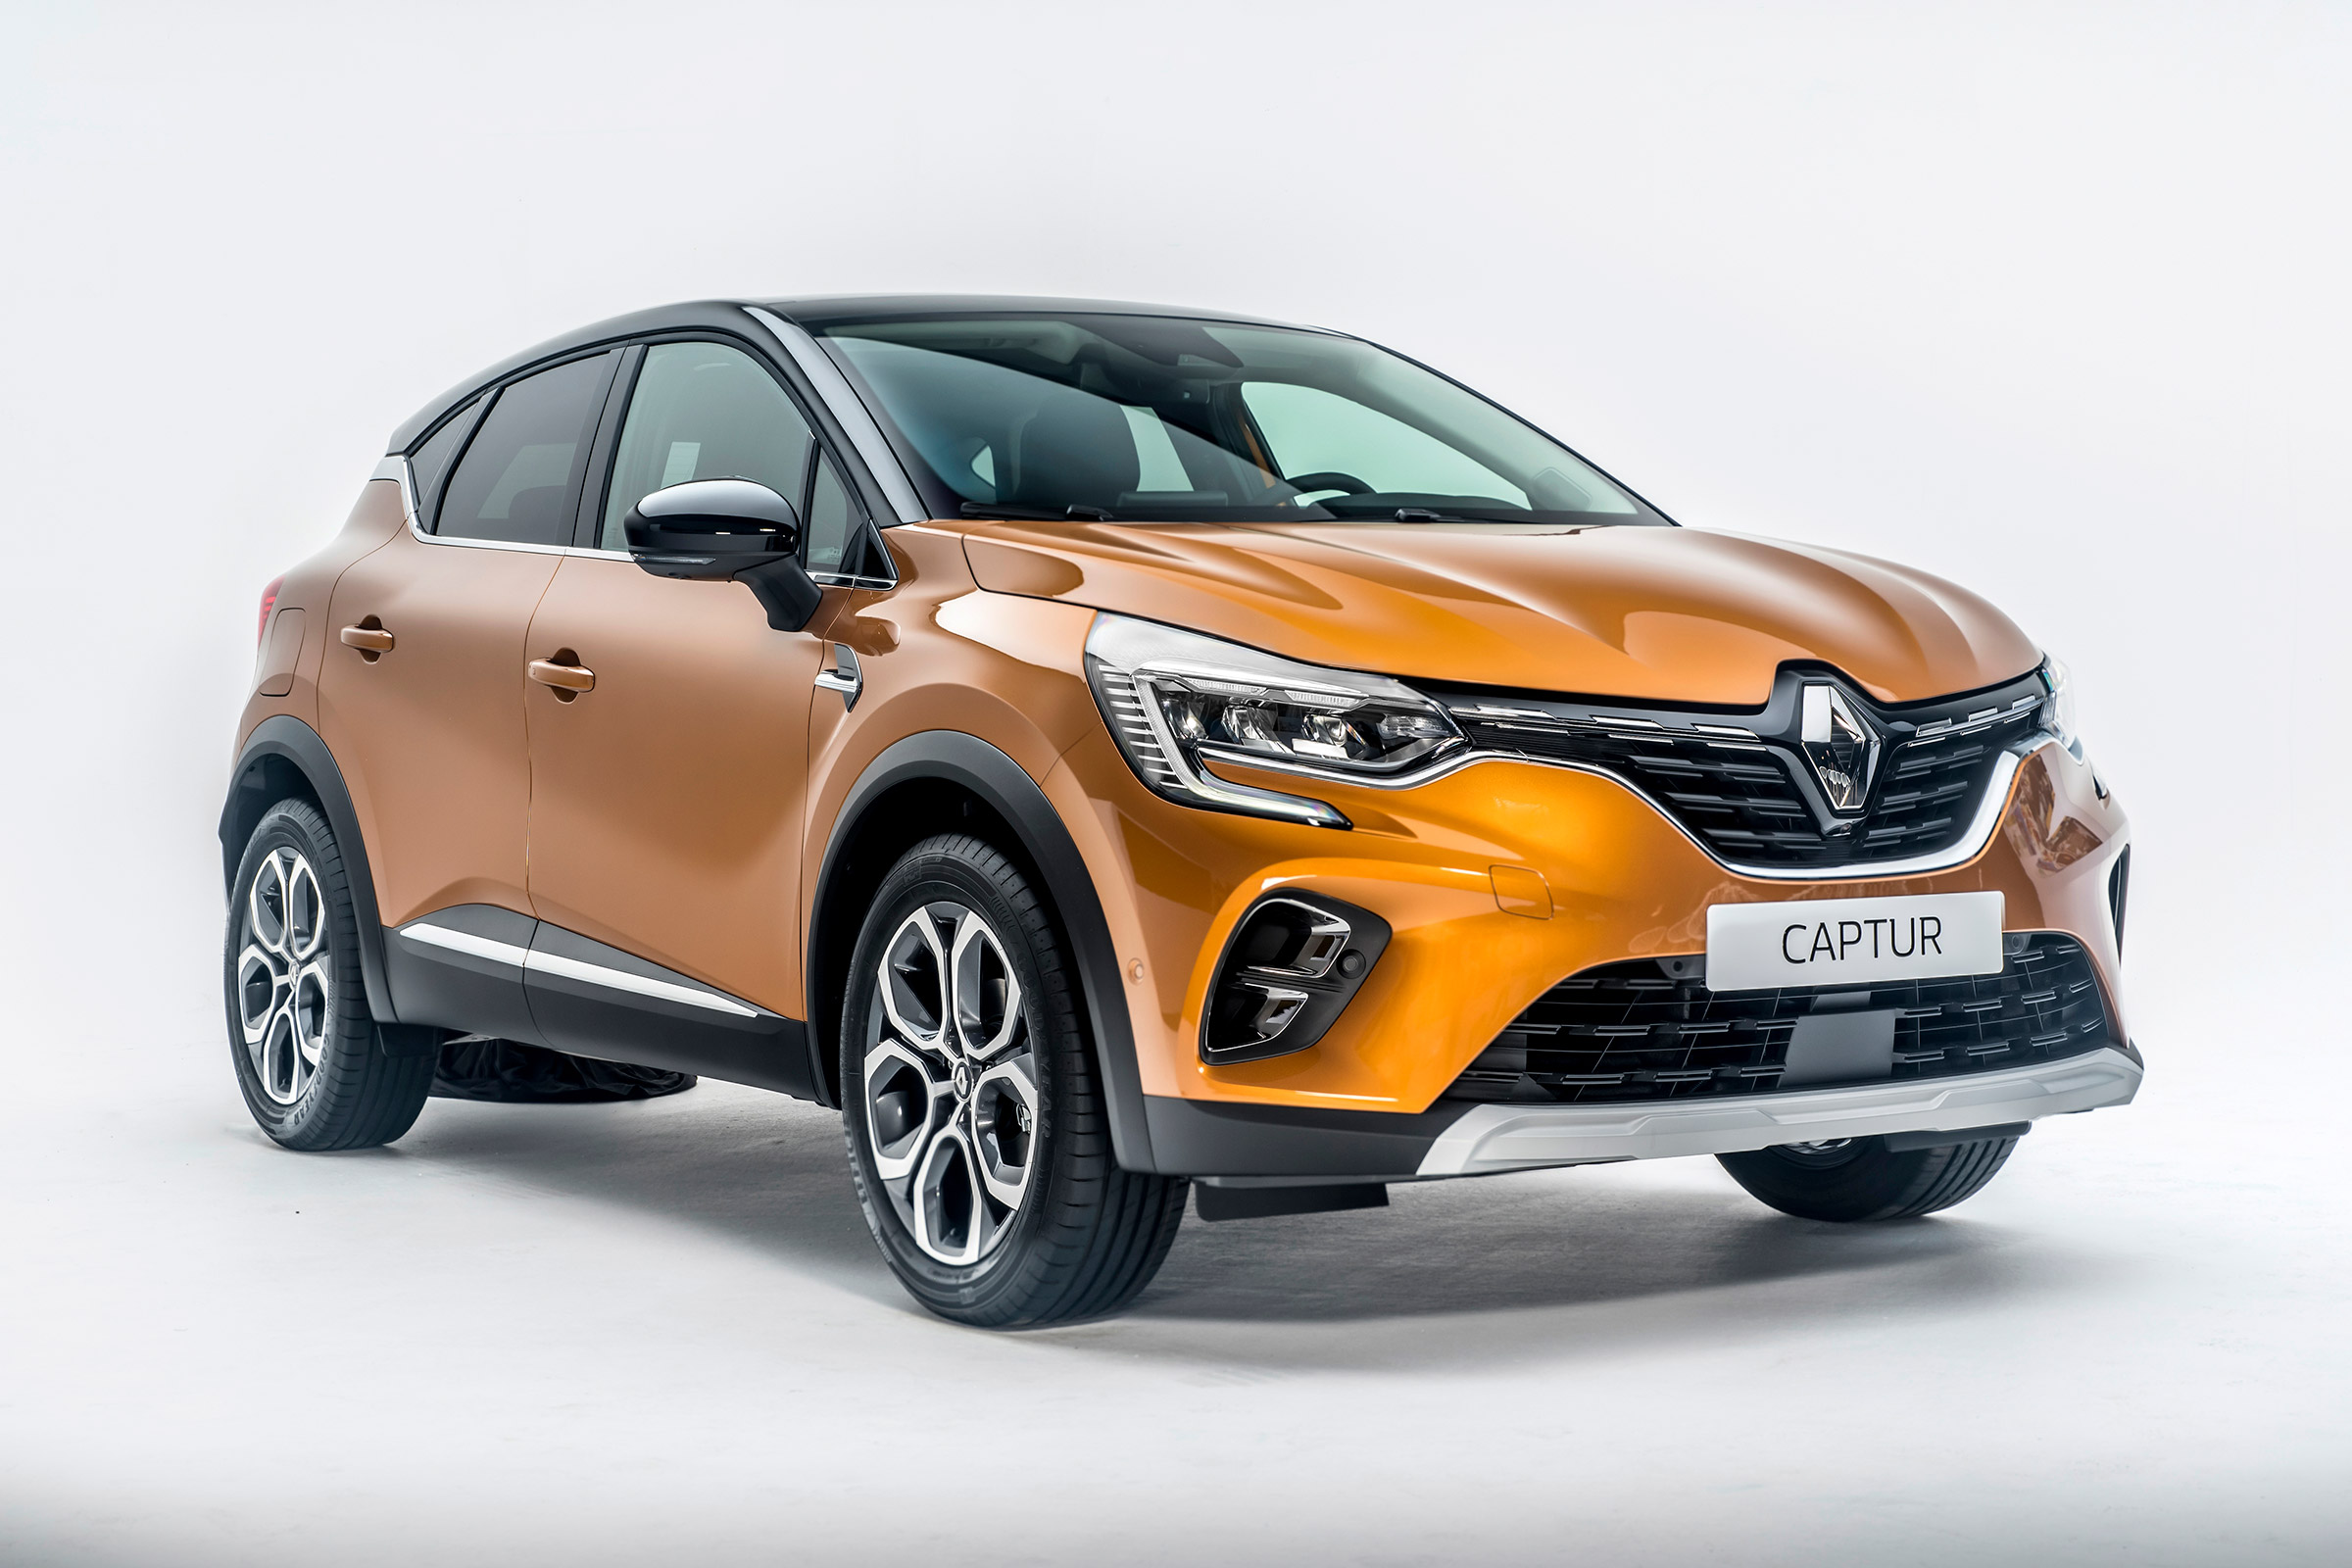 New 2020 Renault Captur: plug-in hybrid E-Tech priced from 